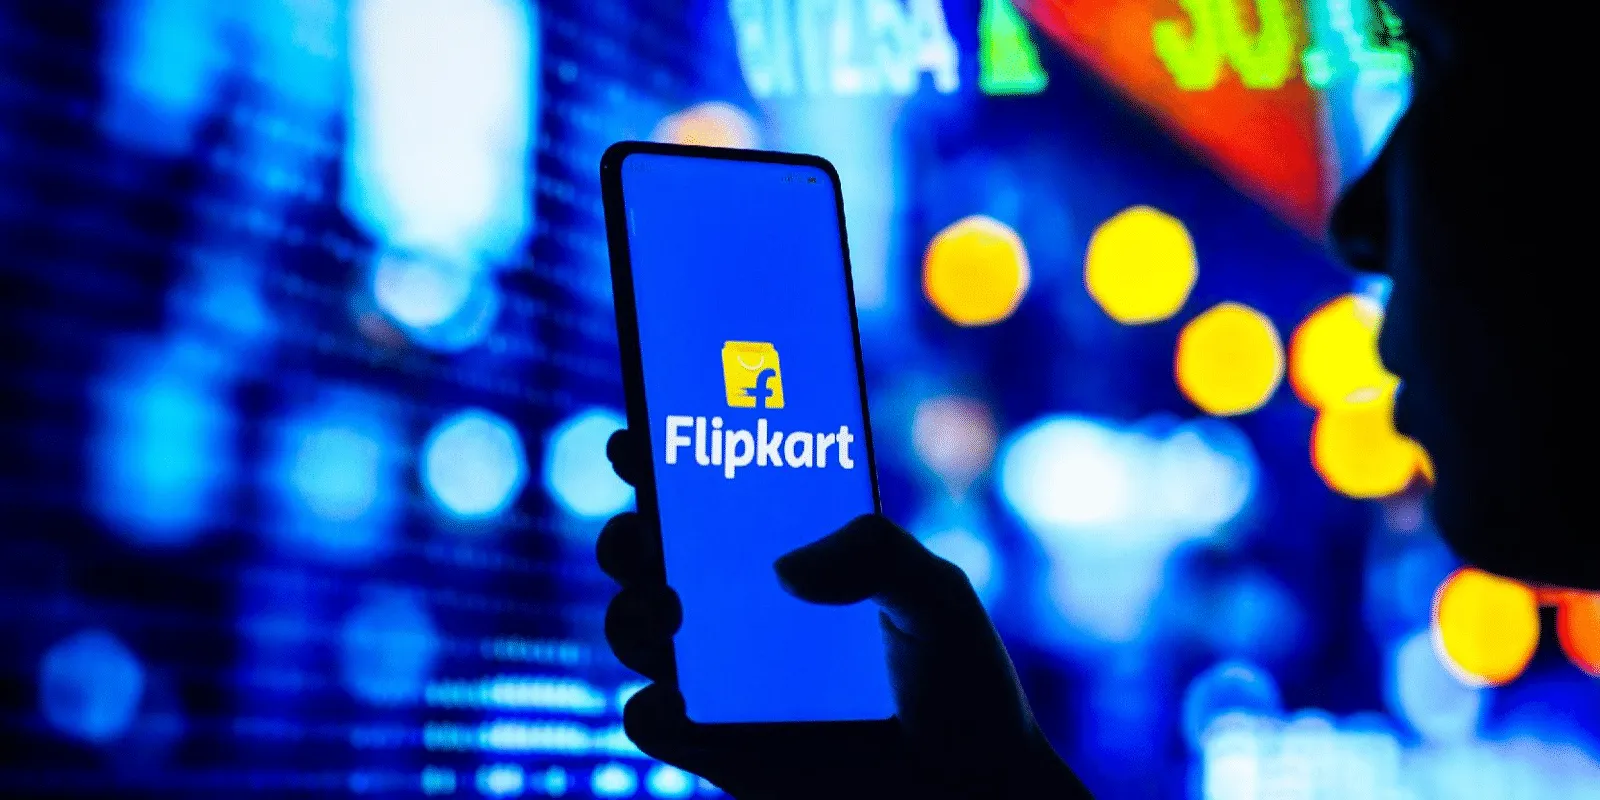 Flipkart to introduce same-day delivery for ecommerce orders in